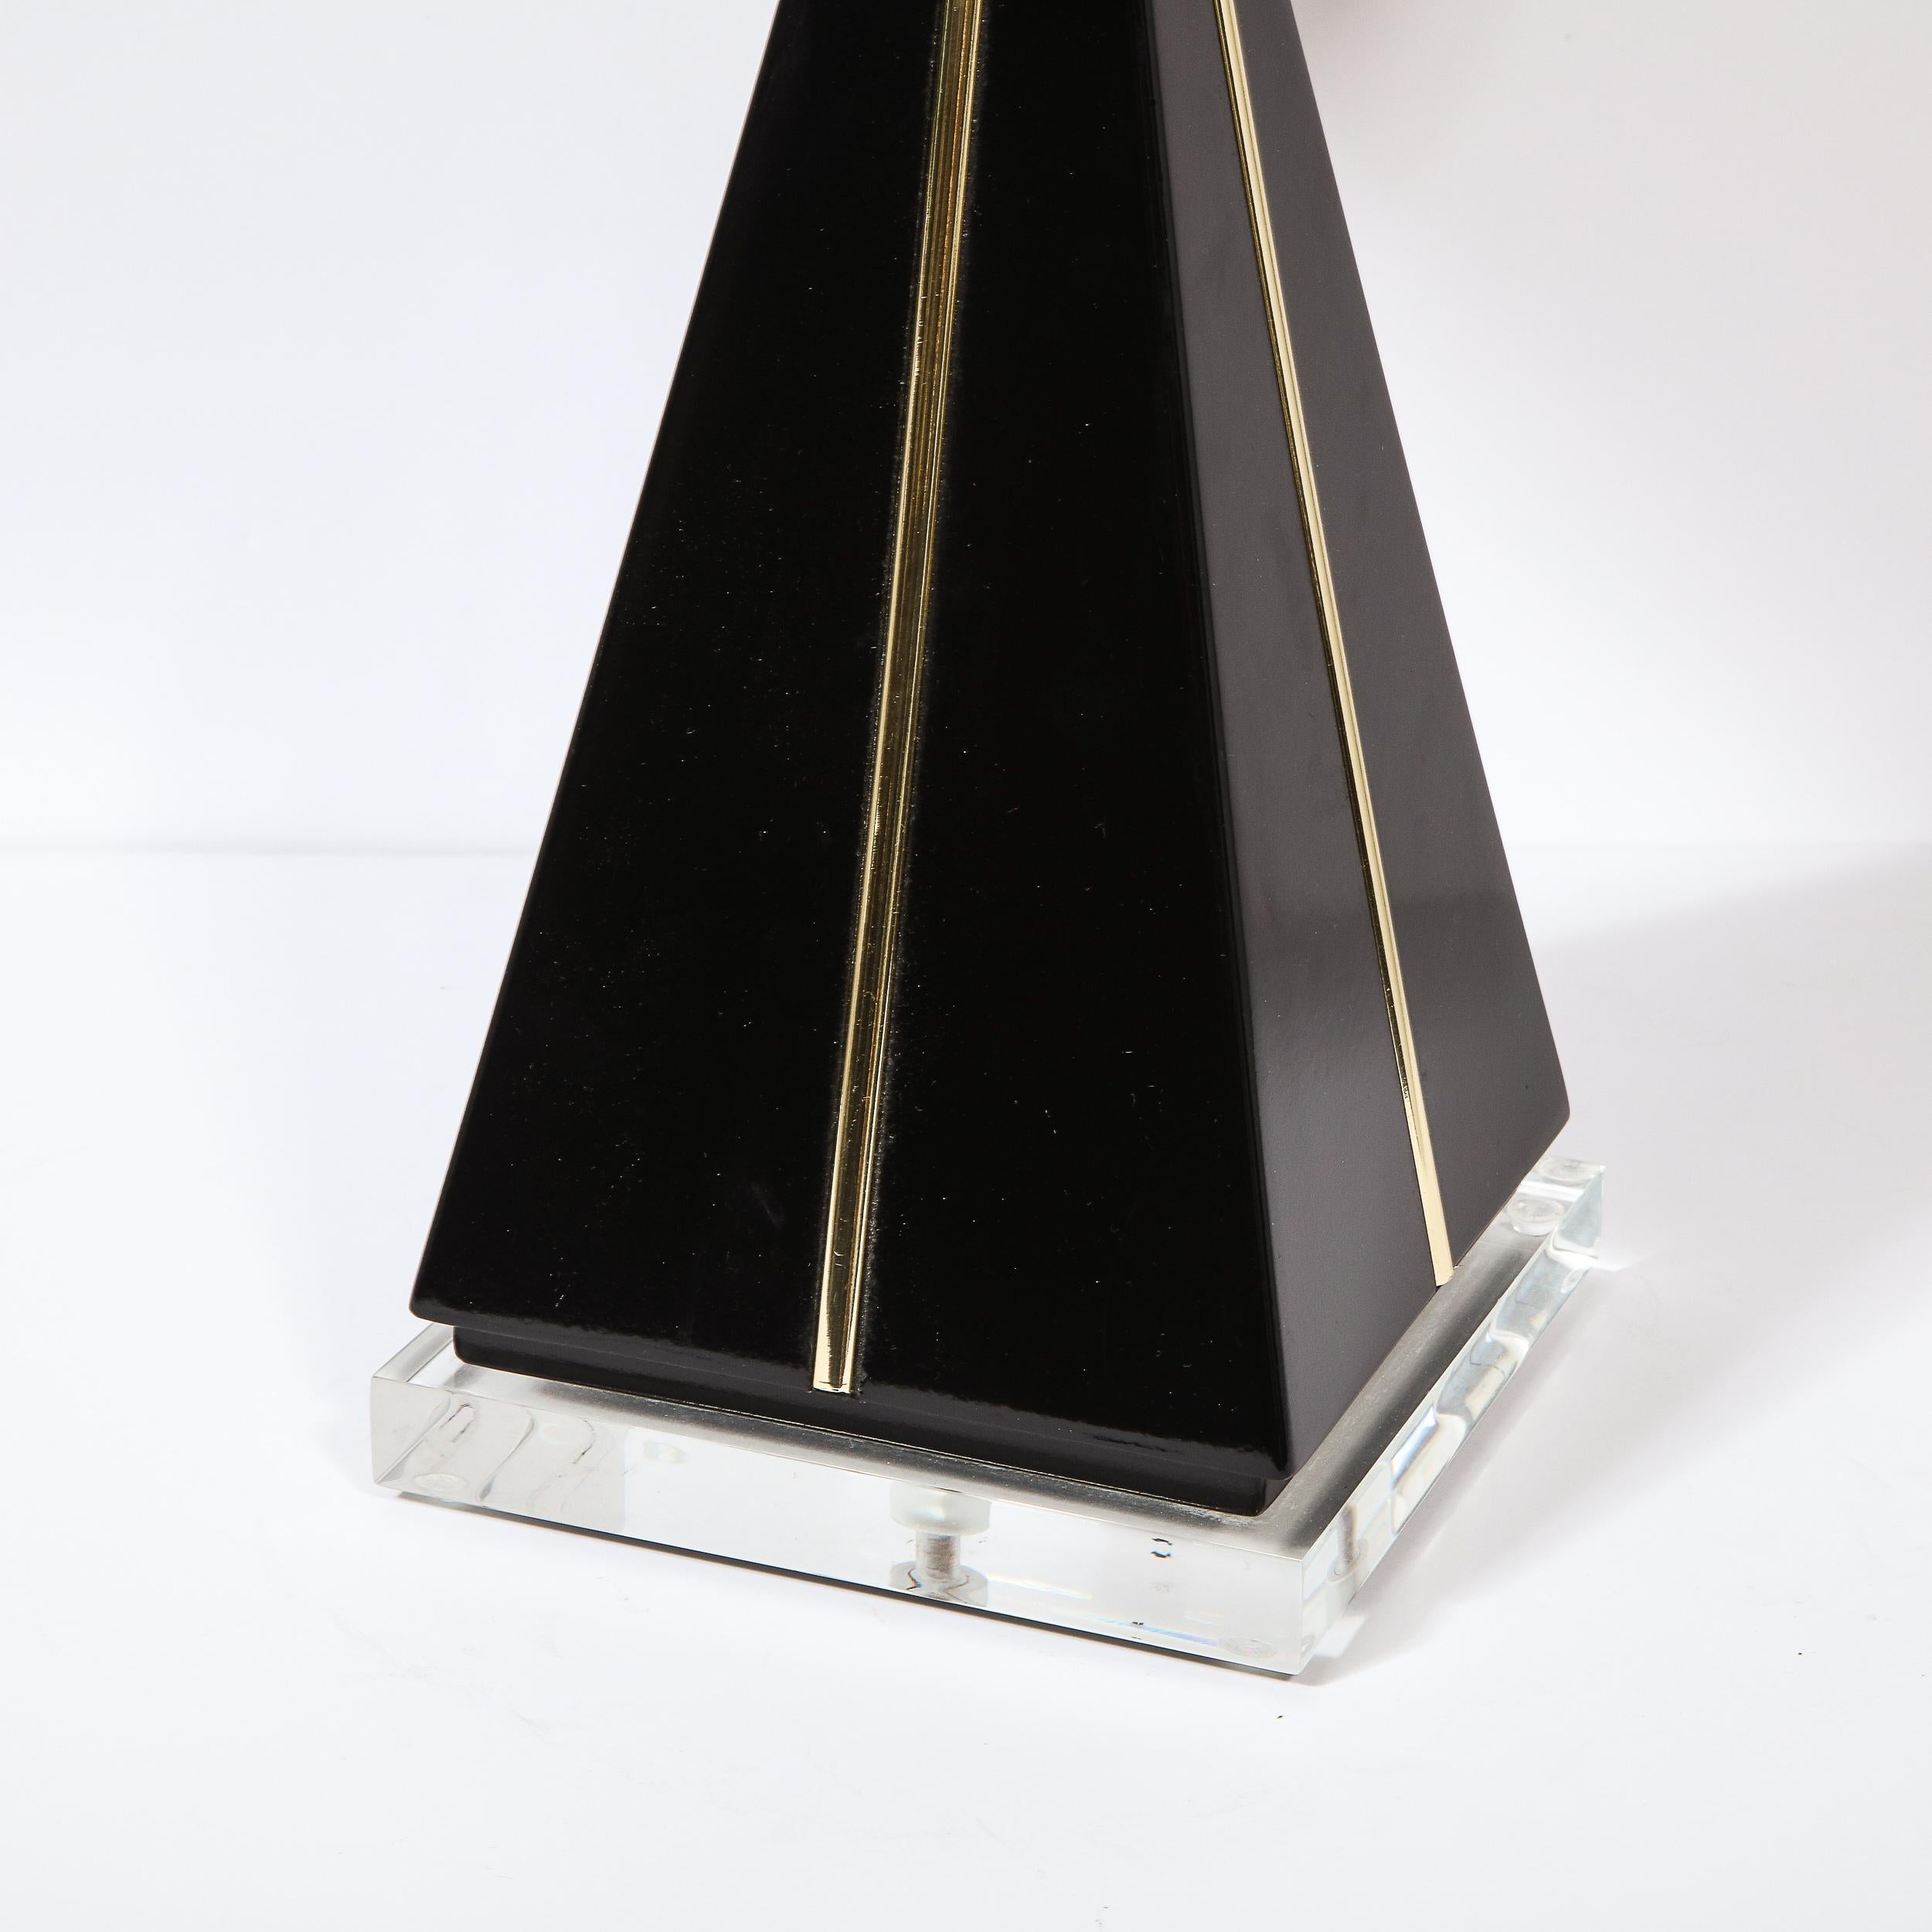 20th Century Modernist Pyramidal Black Lacquer, Gilded Resin & Lucite Table Lamp